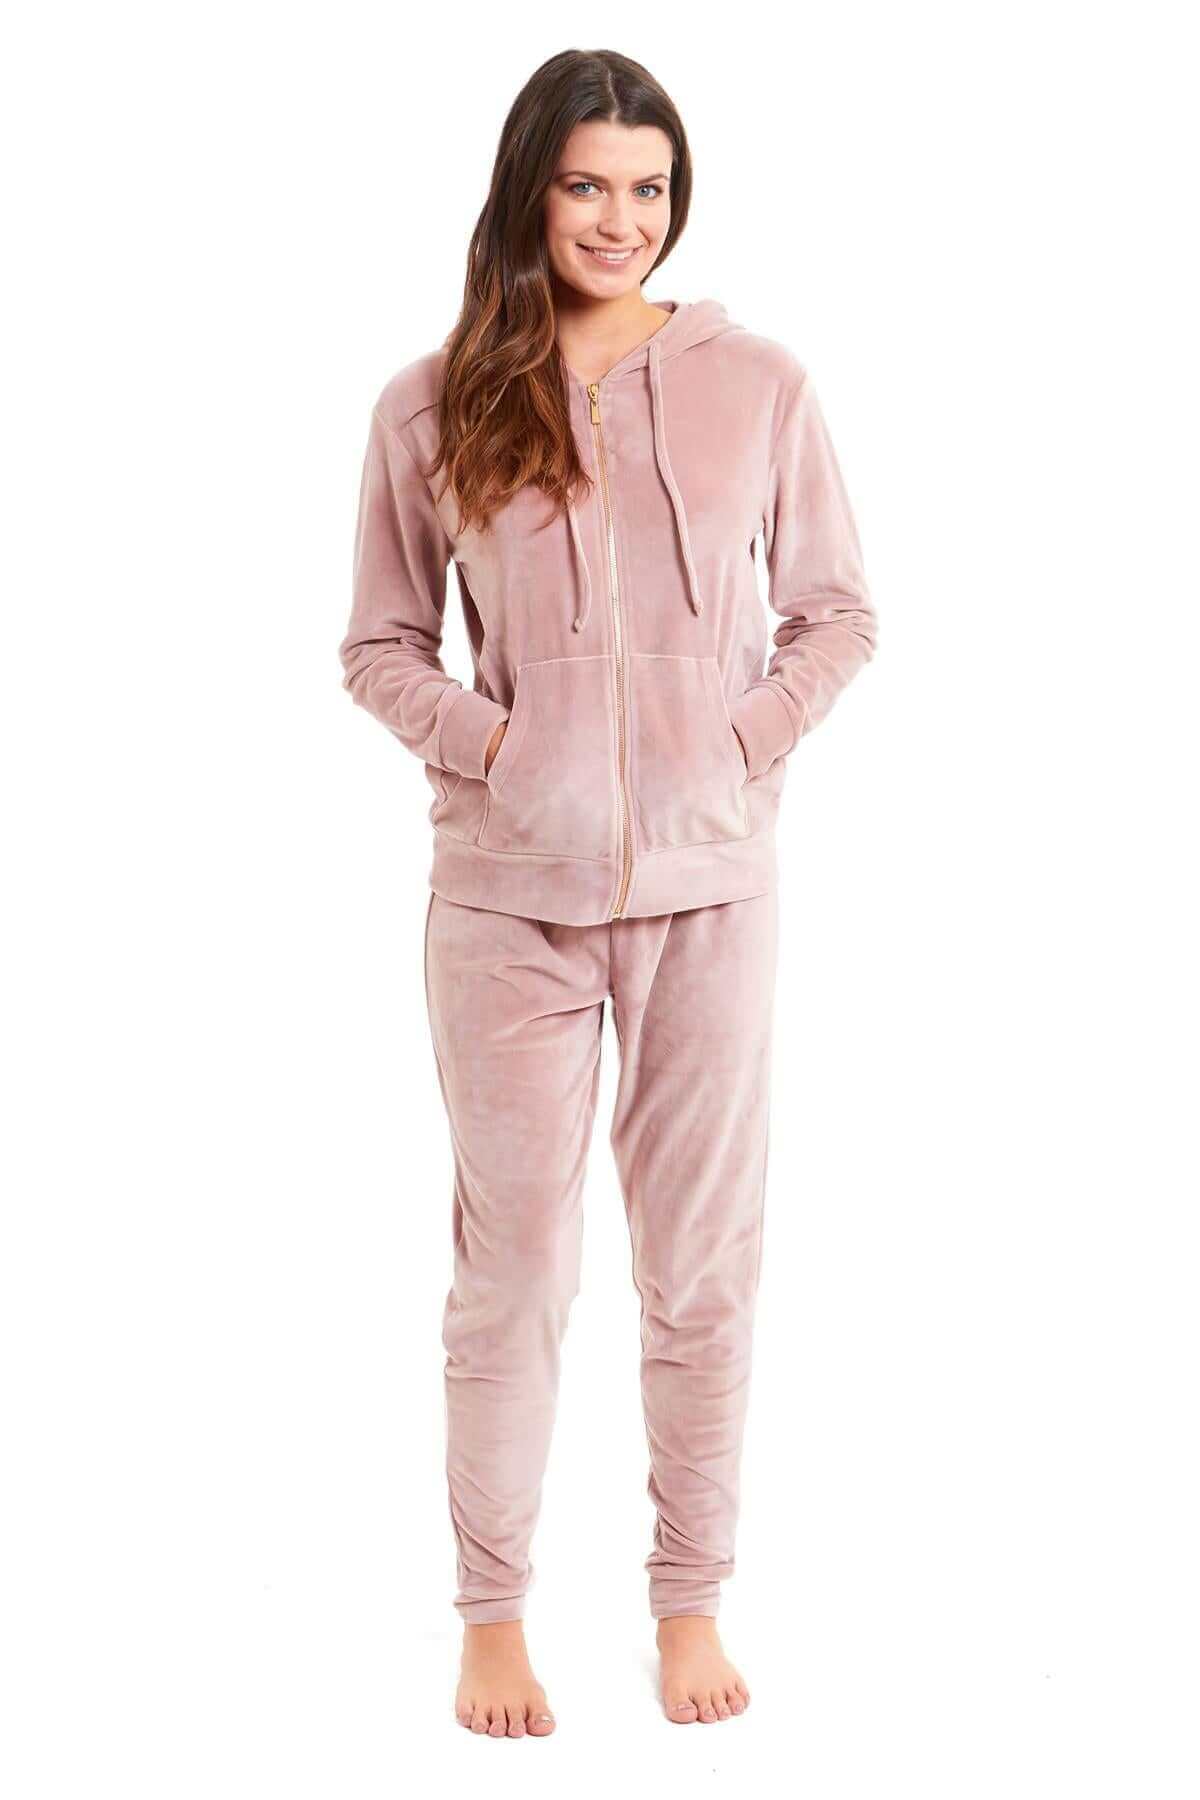 Women's Hooded Velour Zipped Track Suit Pyjama Loungewear Velvet Sets. Buy now for £20.00. A Pyjamas by Daisy Dreamer. 12-14, 14-16, 16-18, 18-20, 20-22, 8-10, bridesmaid, comfortable, daisy dreamer, elasticated, girls, gym, hoodie, hotel, large, loungewe